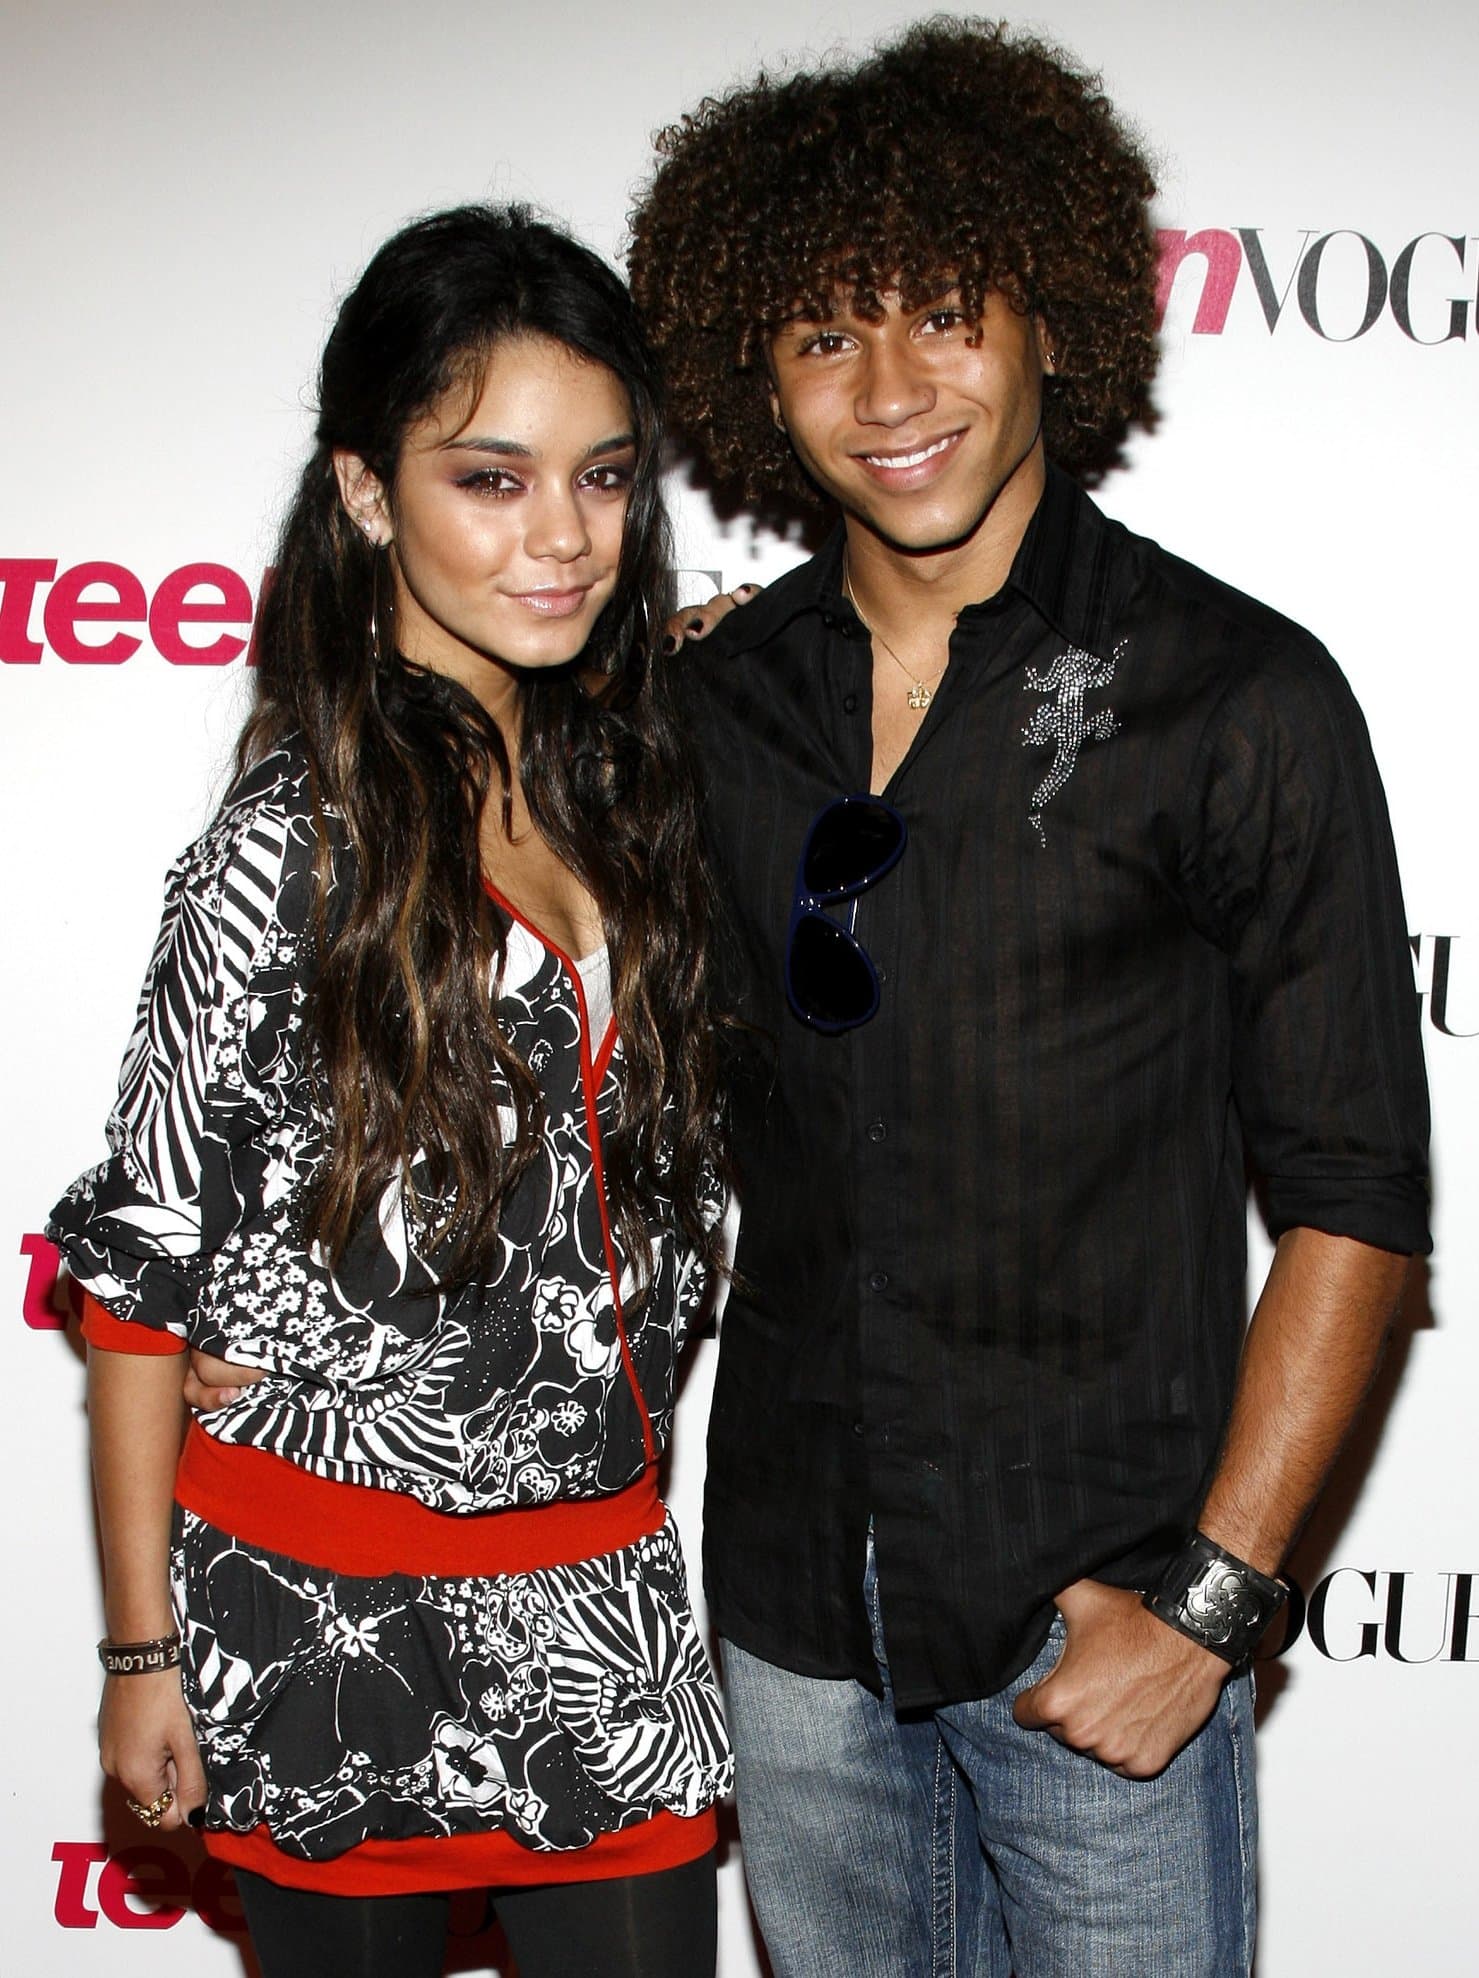 High School Musical stars Corbin Bleu and Vanessa Hudgens at the Teen Vogue Young Hollywood Issue Party